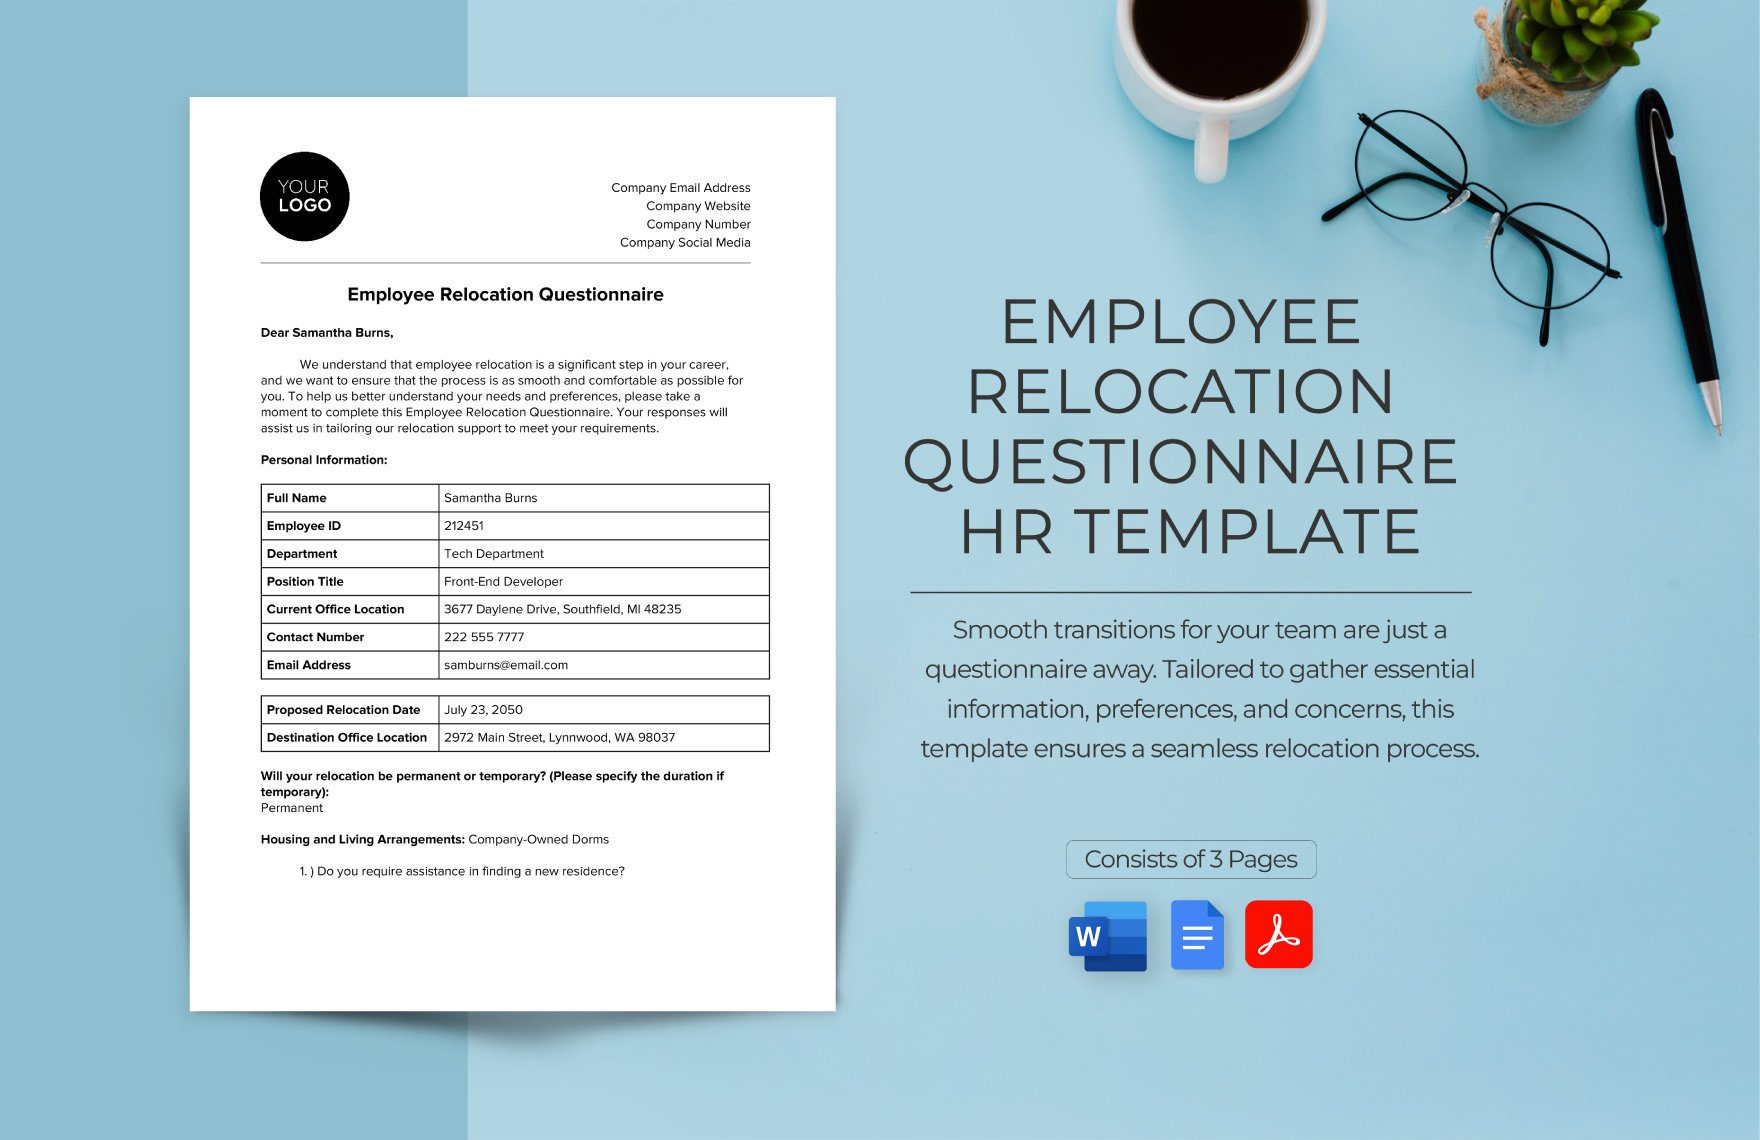 Employee Relocation Questionnaire HR Template